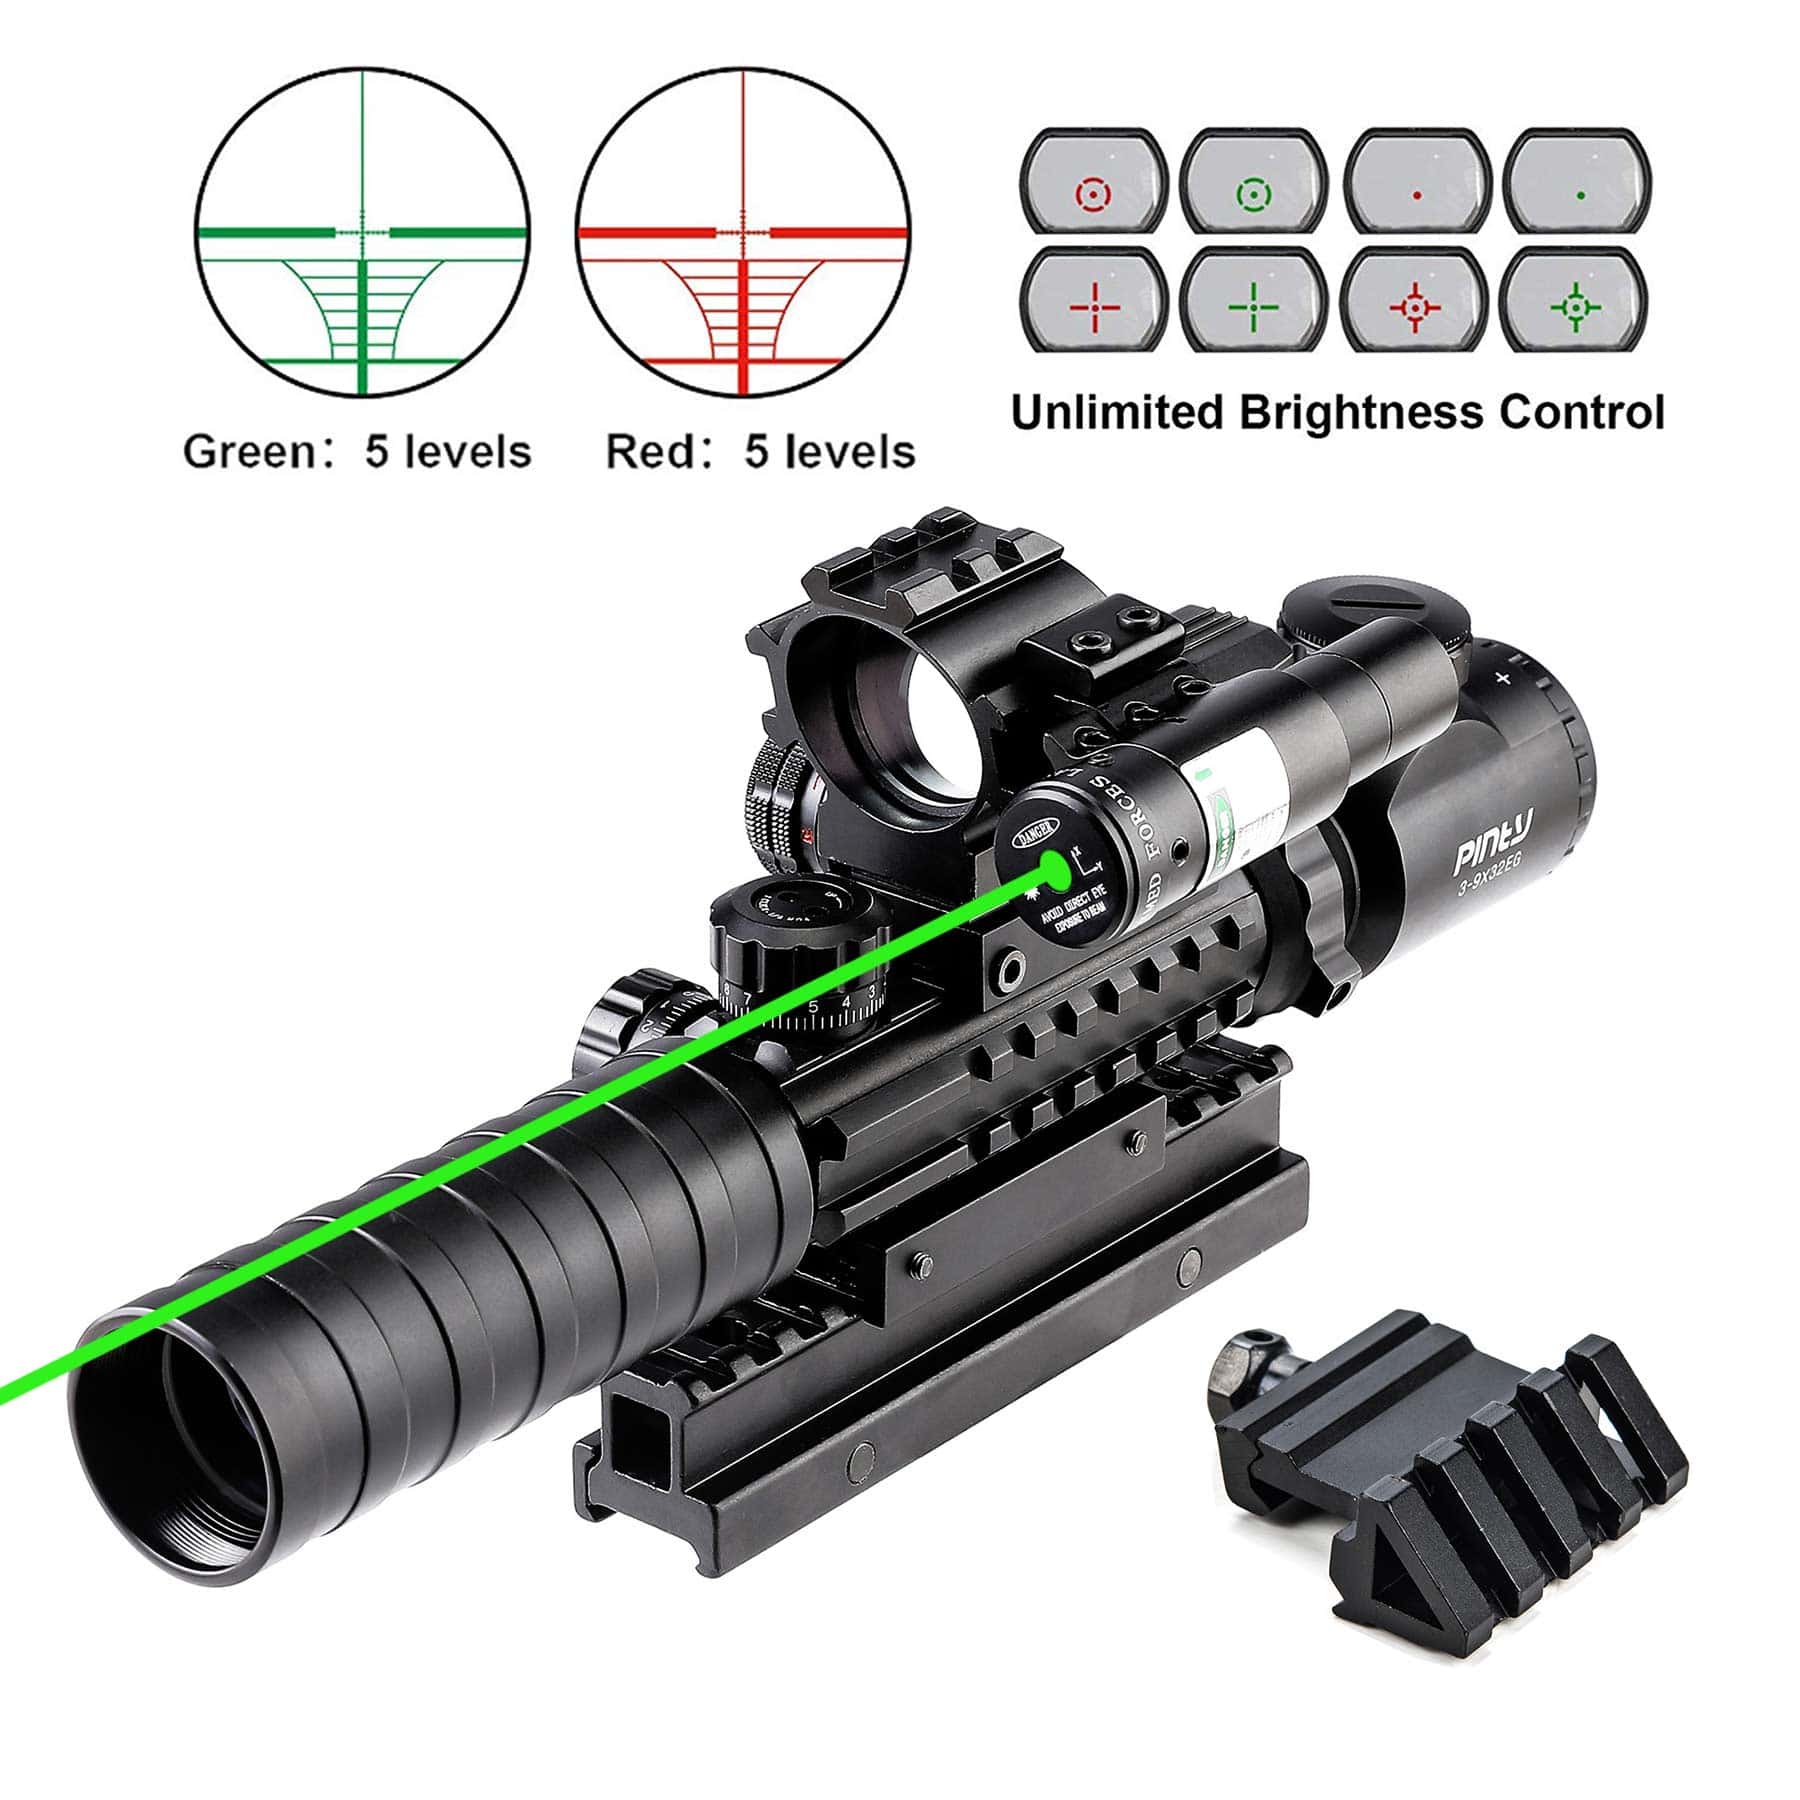 Pinty 4 in 1 Rifle Scope/ Rangefinder/ Green Laser/ Red-Green Dot Sight